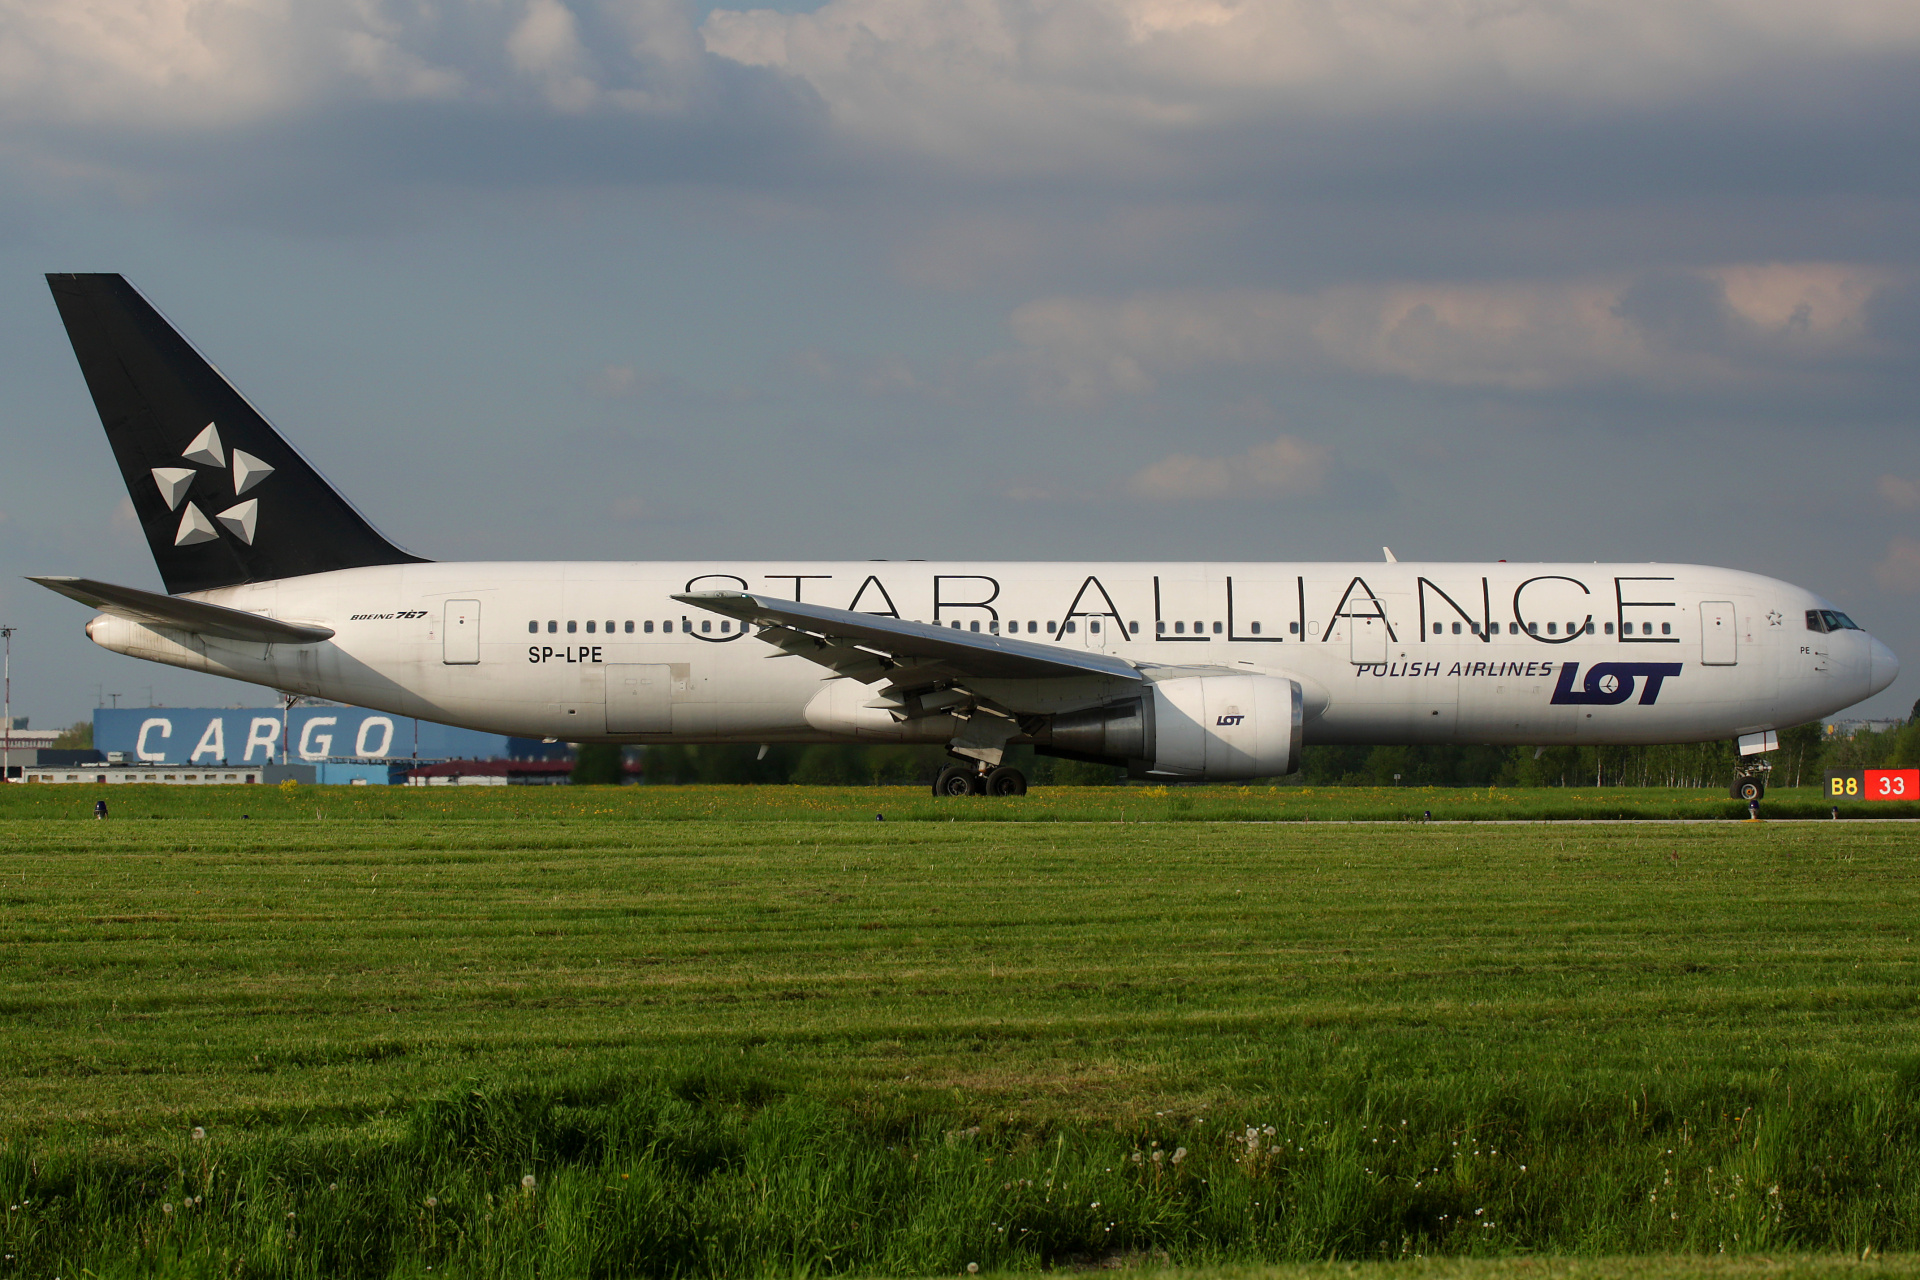 SP-LPE (Star Alliance livery) (Aircraft » EPWA Spotting » Boeing 767-300 » LOT Polish Airlines)